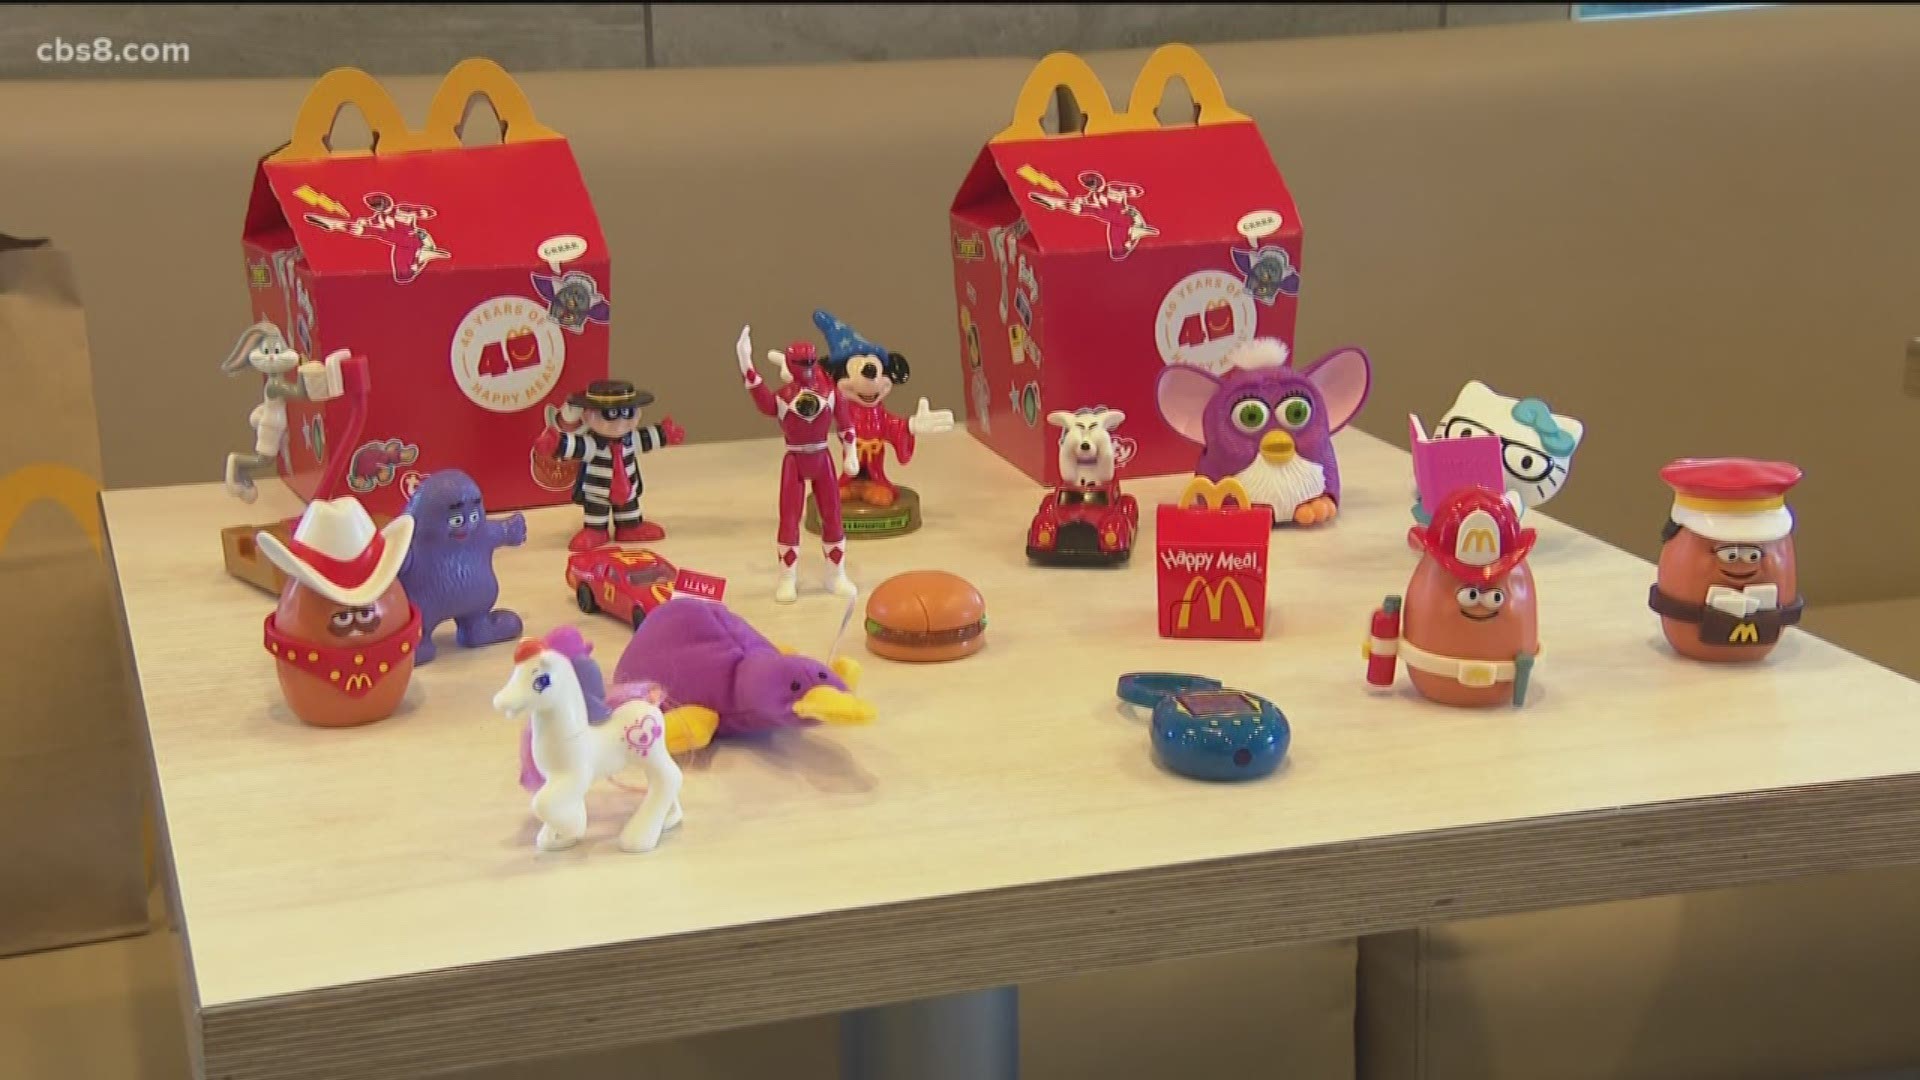 McDonald's throwing it back with toys from past decades